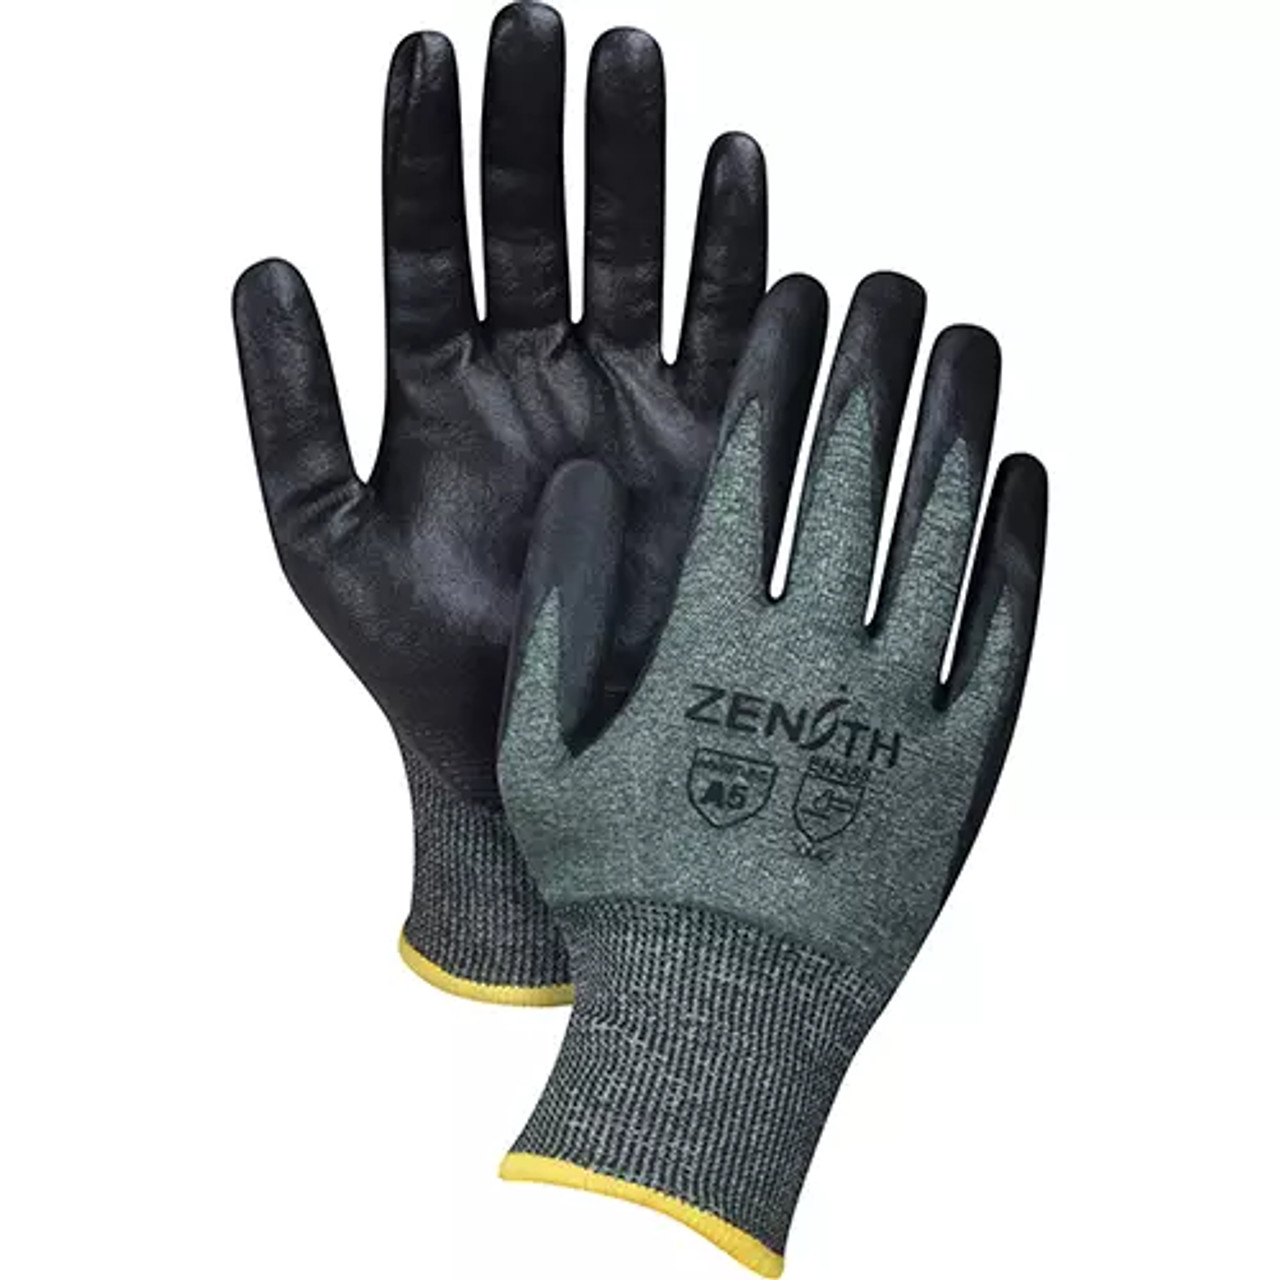 LW Cut-Resistant Gloves Cut Level A5 - Nitrile Coated (Pack of 12) | Zenith